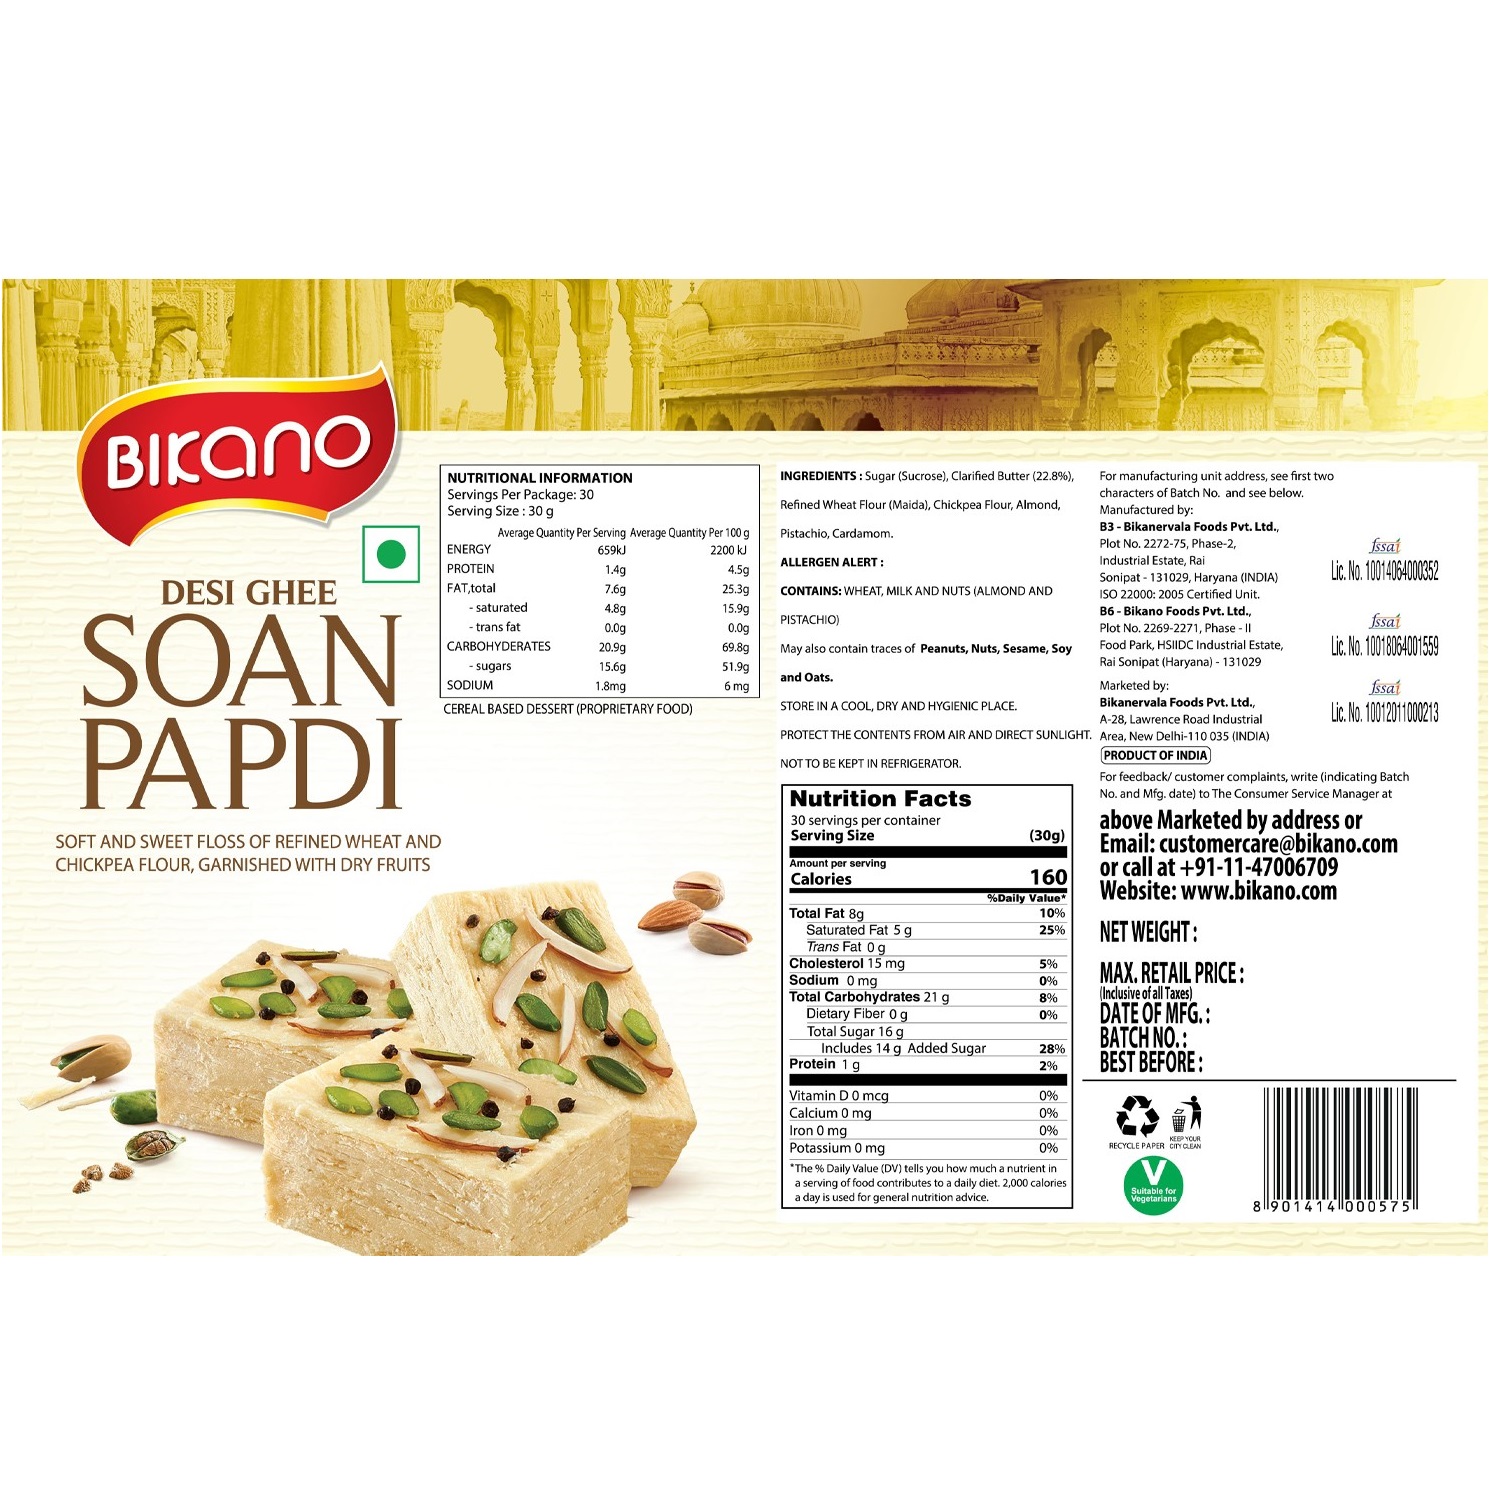 Buy Bikano Soan Papdi - Made With Milk, Soft & Sweet Online at Best Price  of Rs 300 - bigbasket